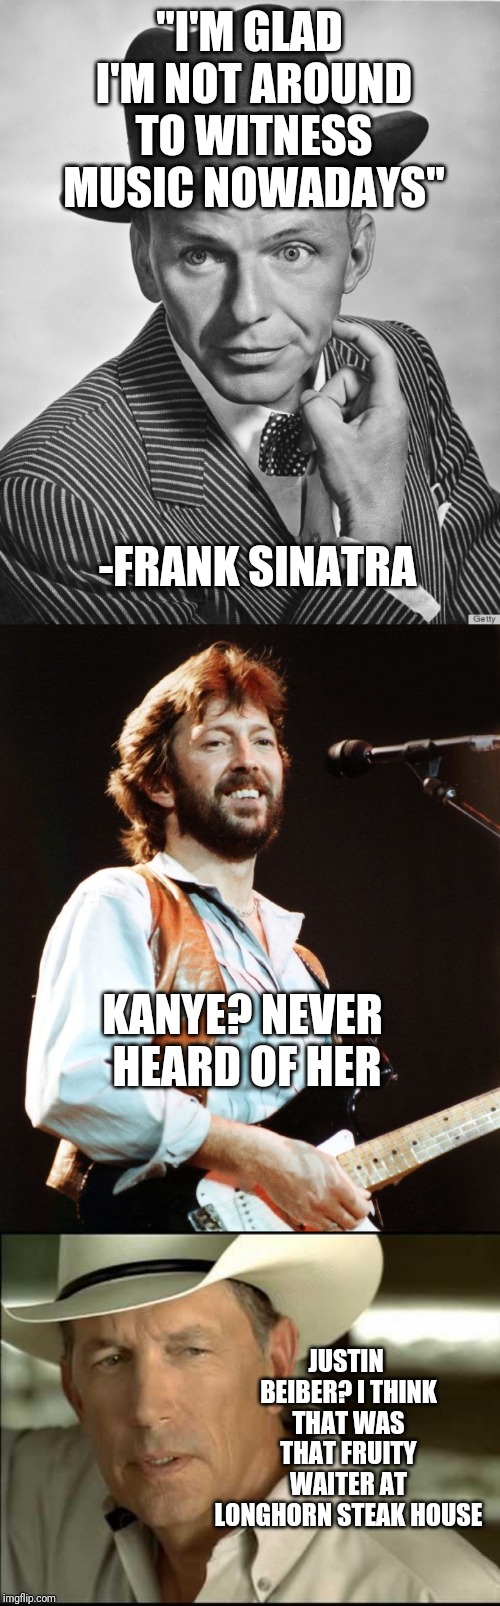 "I'M GLAD I'M NOT AROUND TO WITNESS MUSIC NOWADAYS" -FRANK SINATRA KANYE? NEVER HEARD OF HER JUSTIN BEIBER? I THINK THAT WAS THAT FRUITY WAI | image tagged in king george strait,eric clapton,frank sinatra hat | made w/ Imgflip meme maker